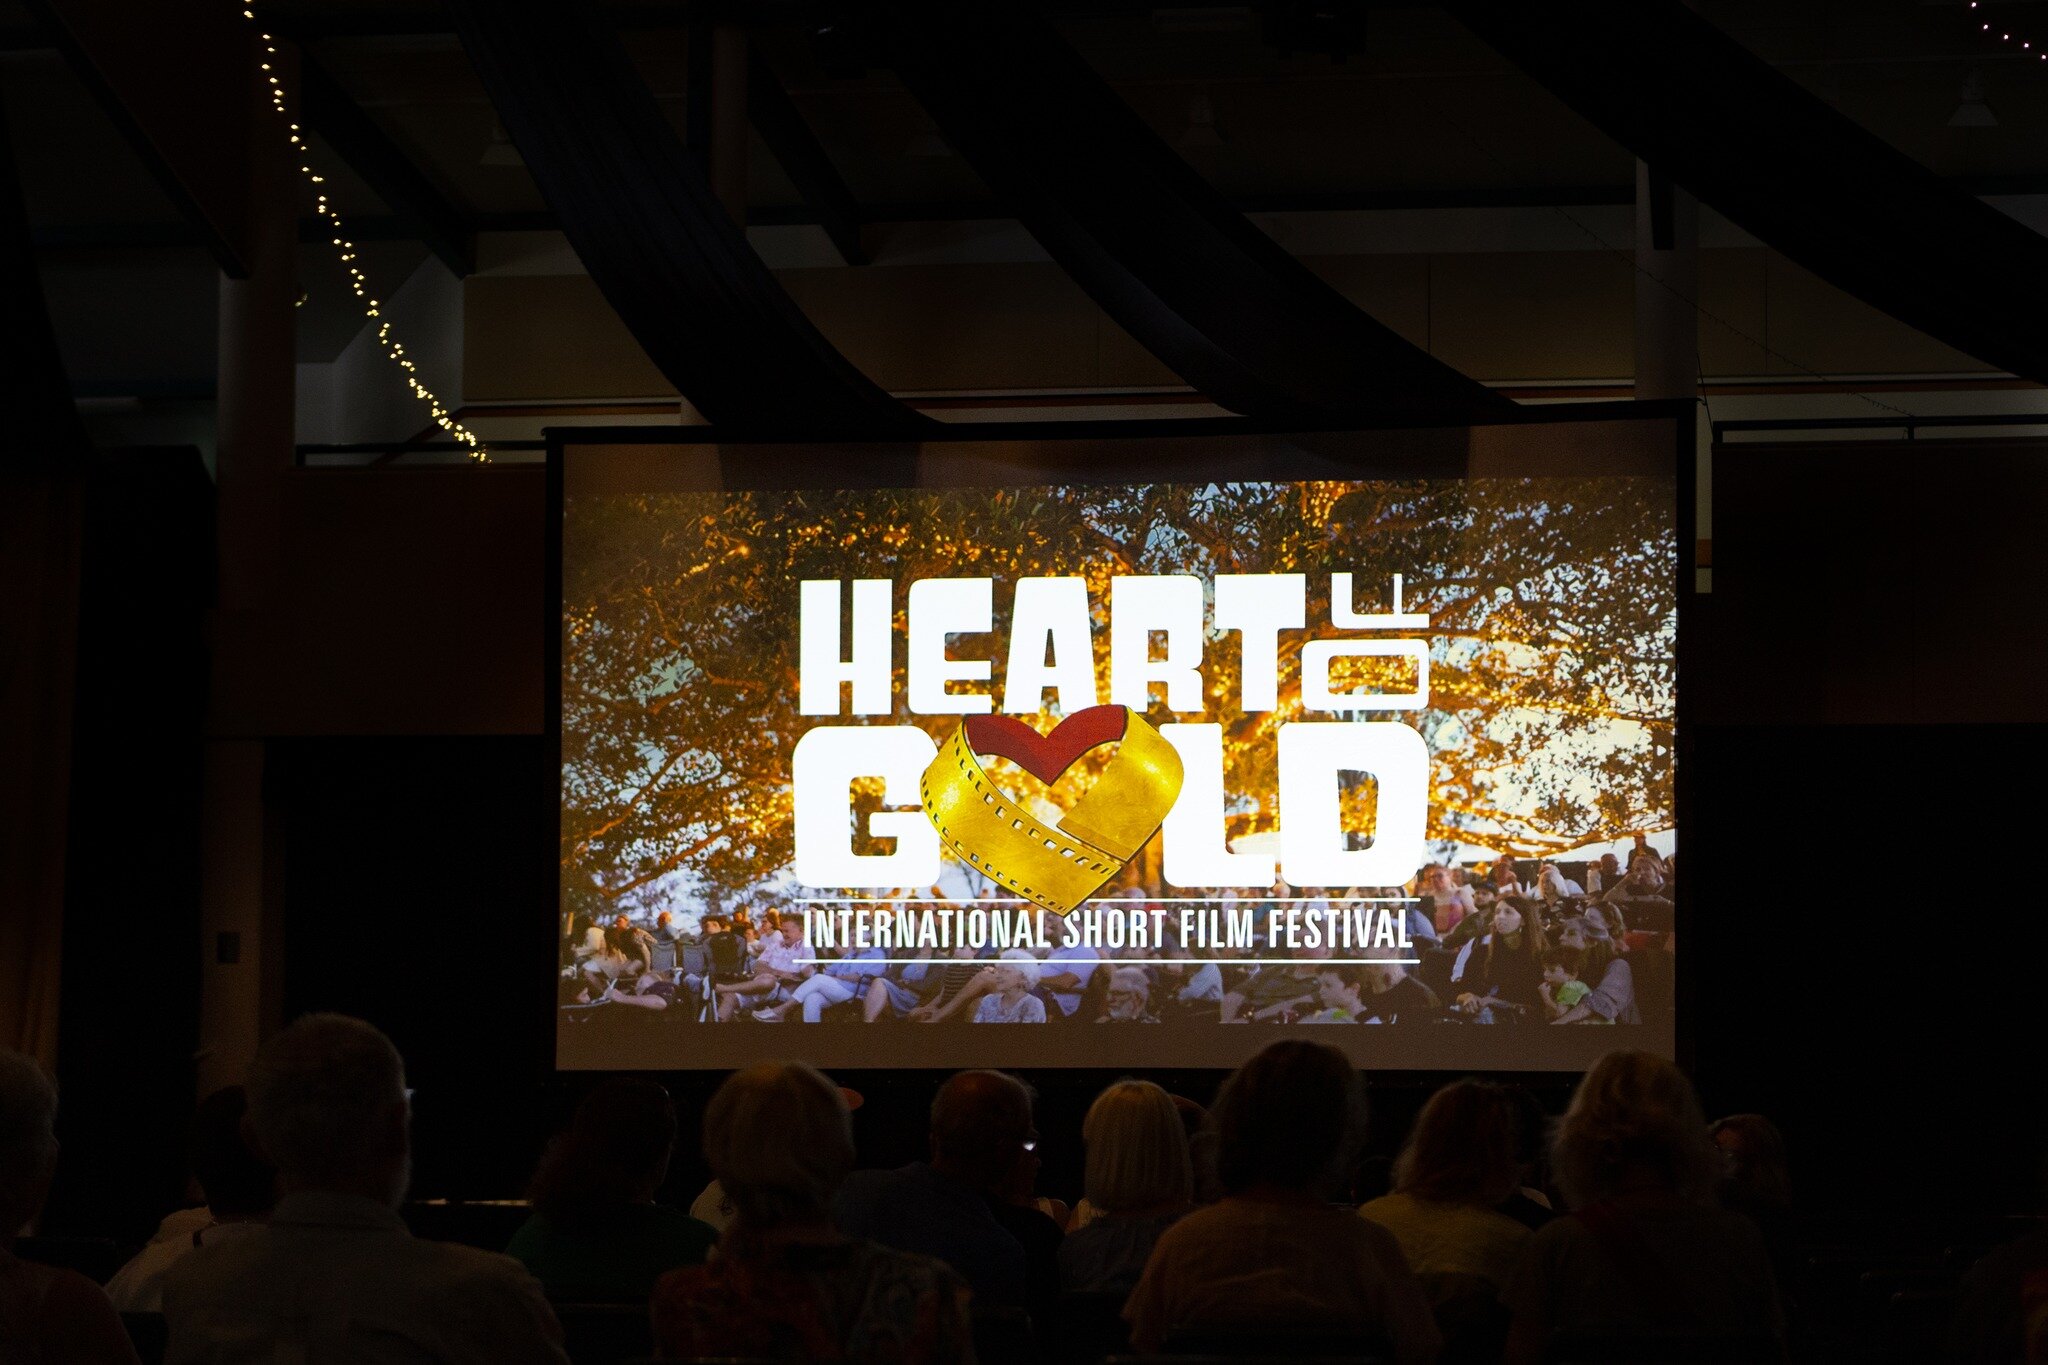 One week on, and we're having withdrawals! If you were crazy enough to miss out on Regional Australia's most favourite International Short Film Festival, here's a glimpse of what you missed 👇 

Heart of Gold Day 1 💛 We had a full day and night of s